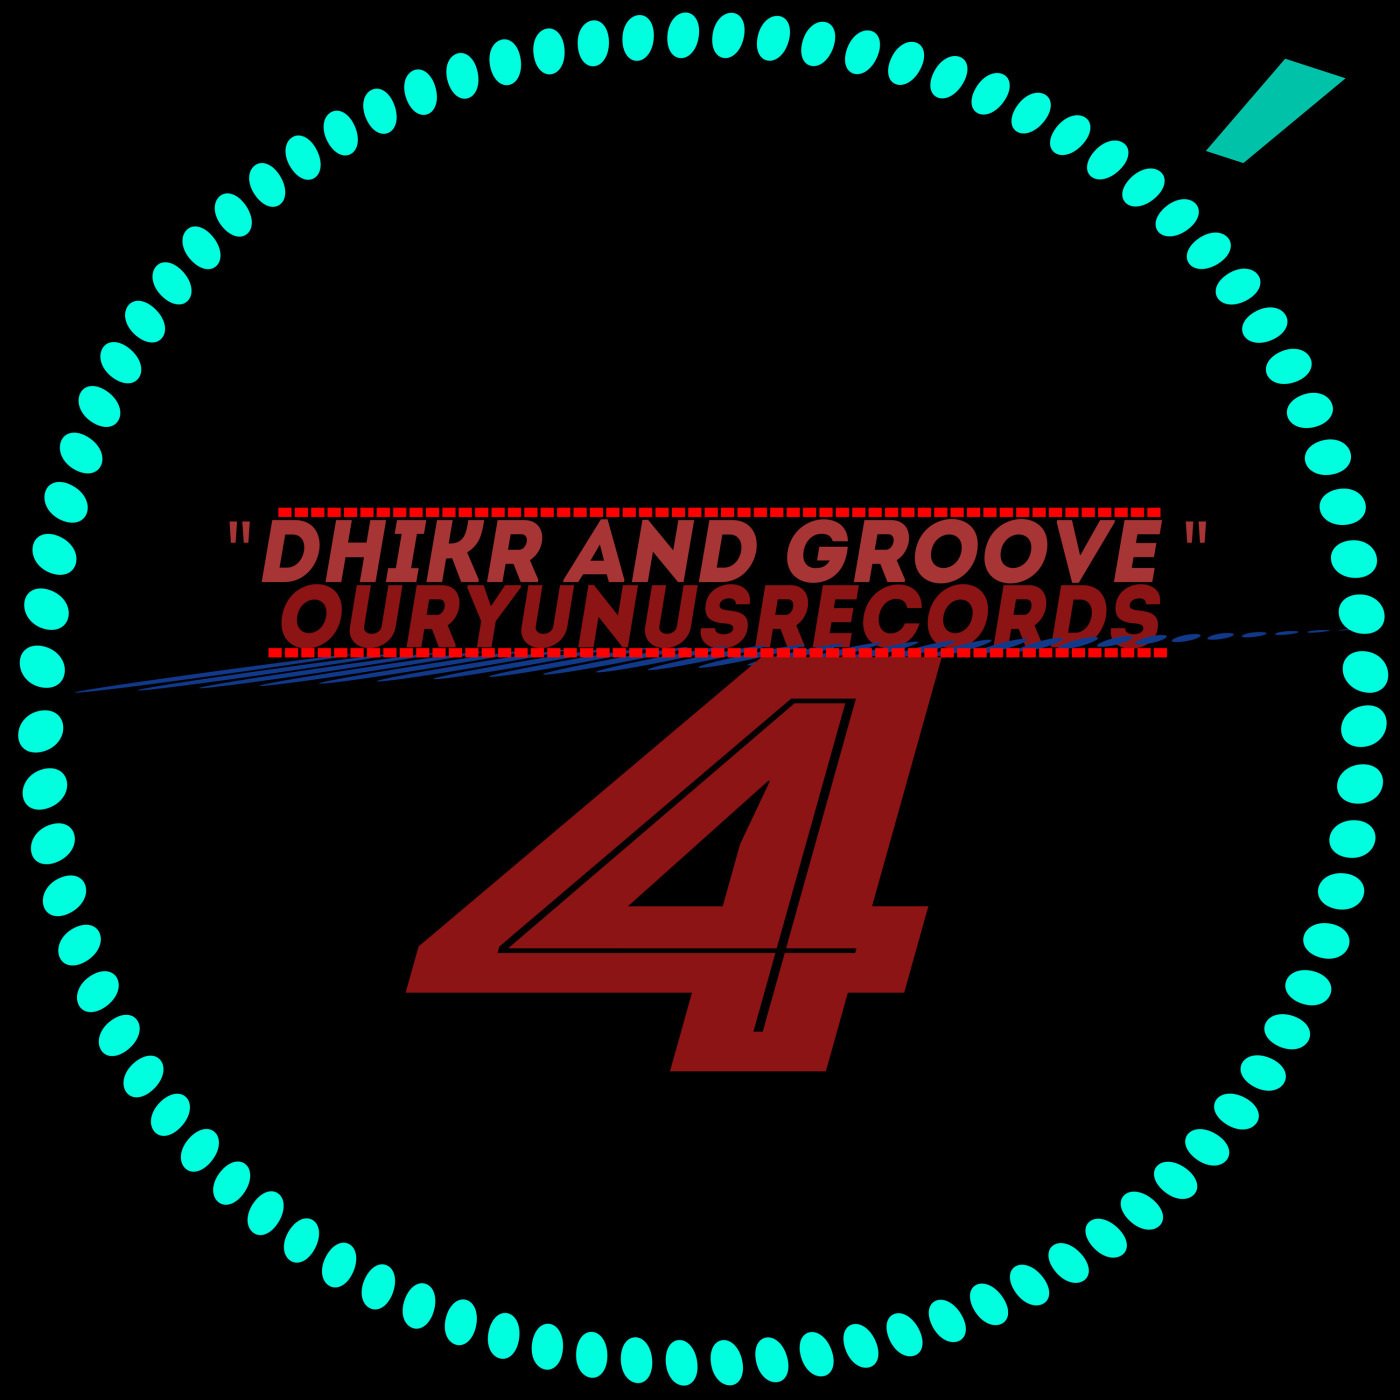 Jonasclean - Dhikr and Groove 4 / Our Yunus Records